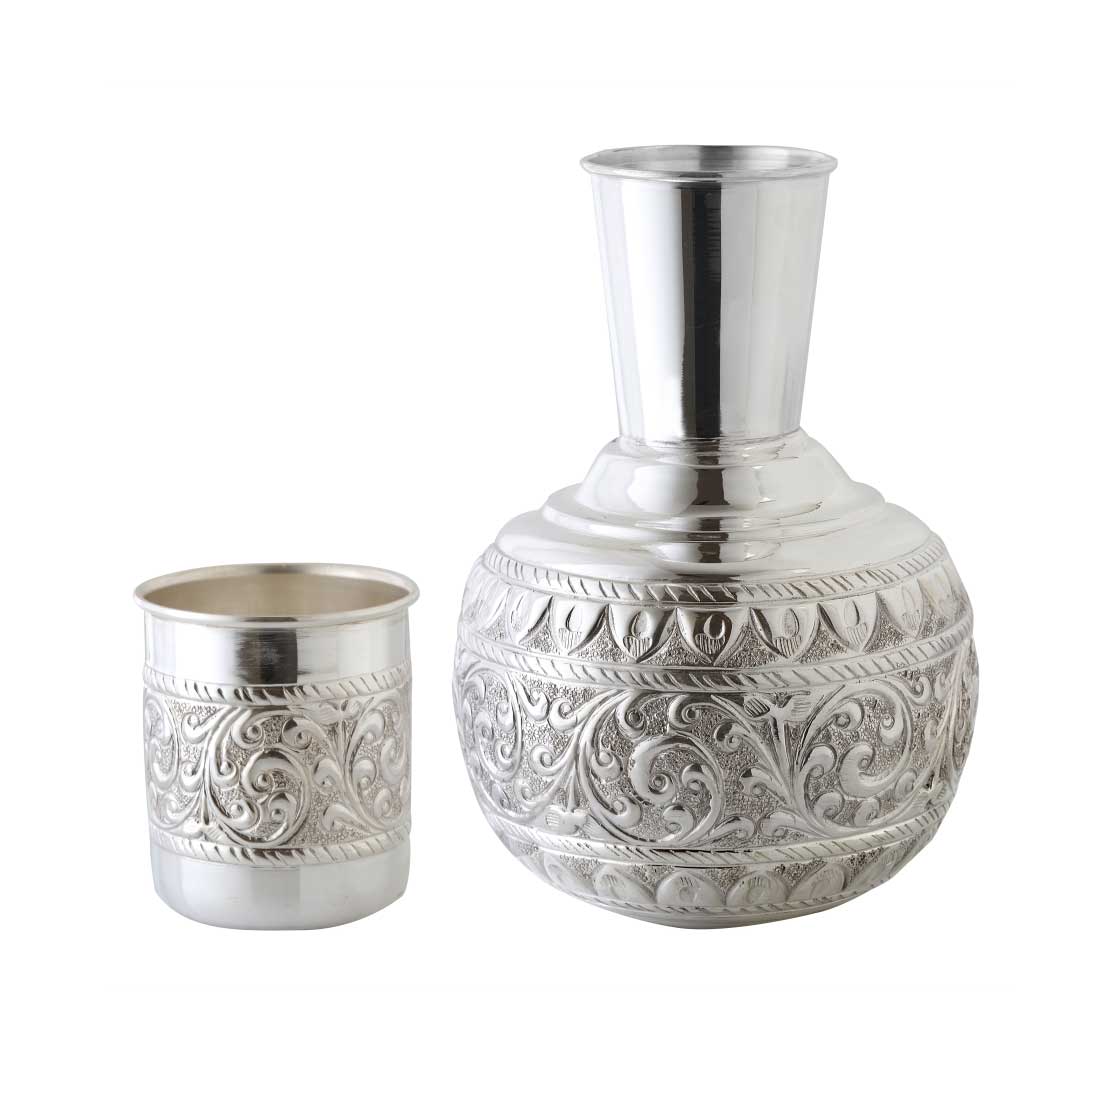 Silver Gift Articles & Kitchenware